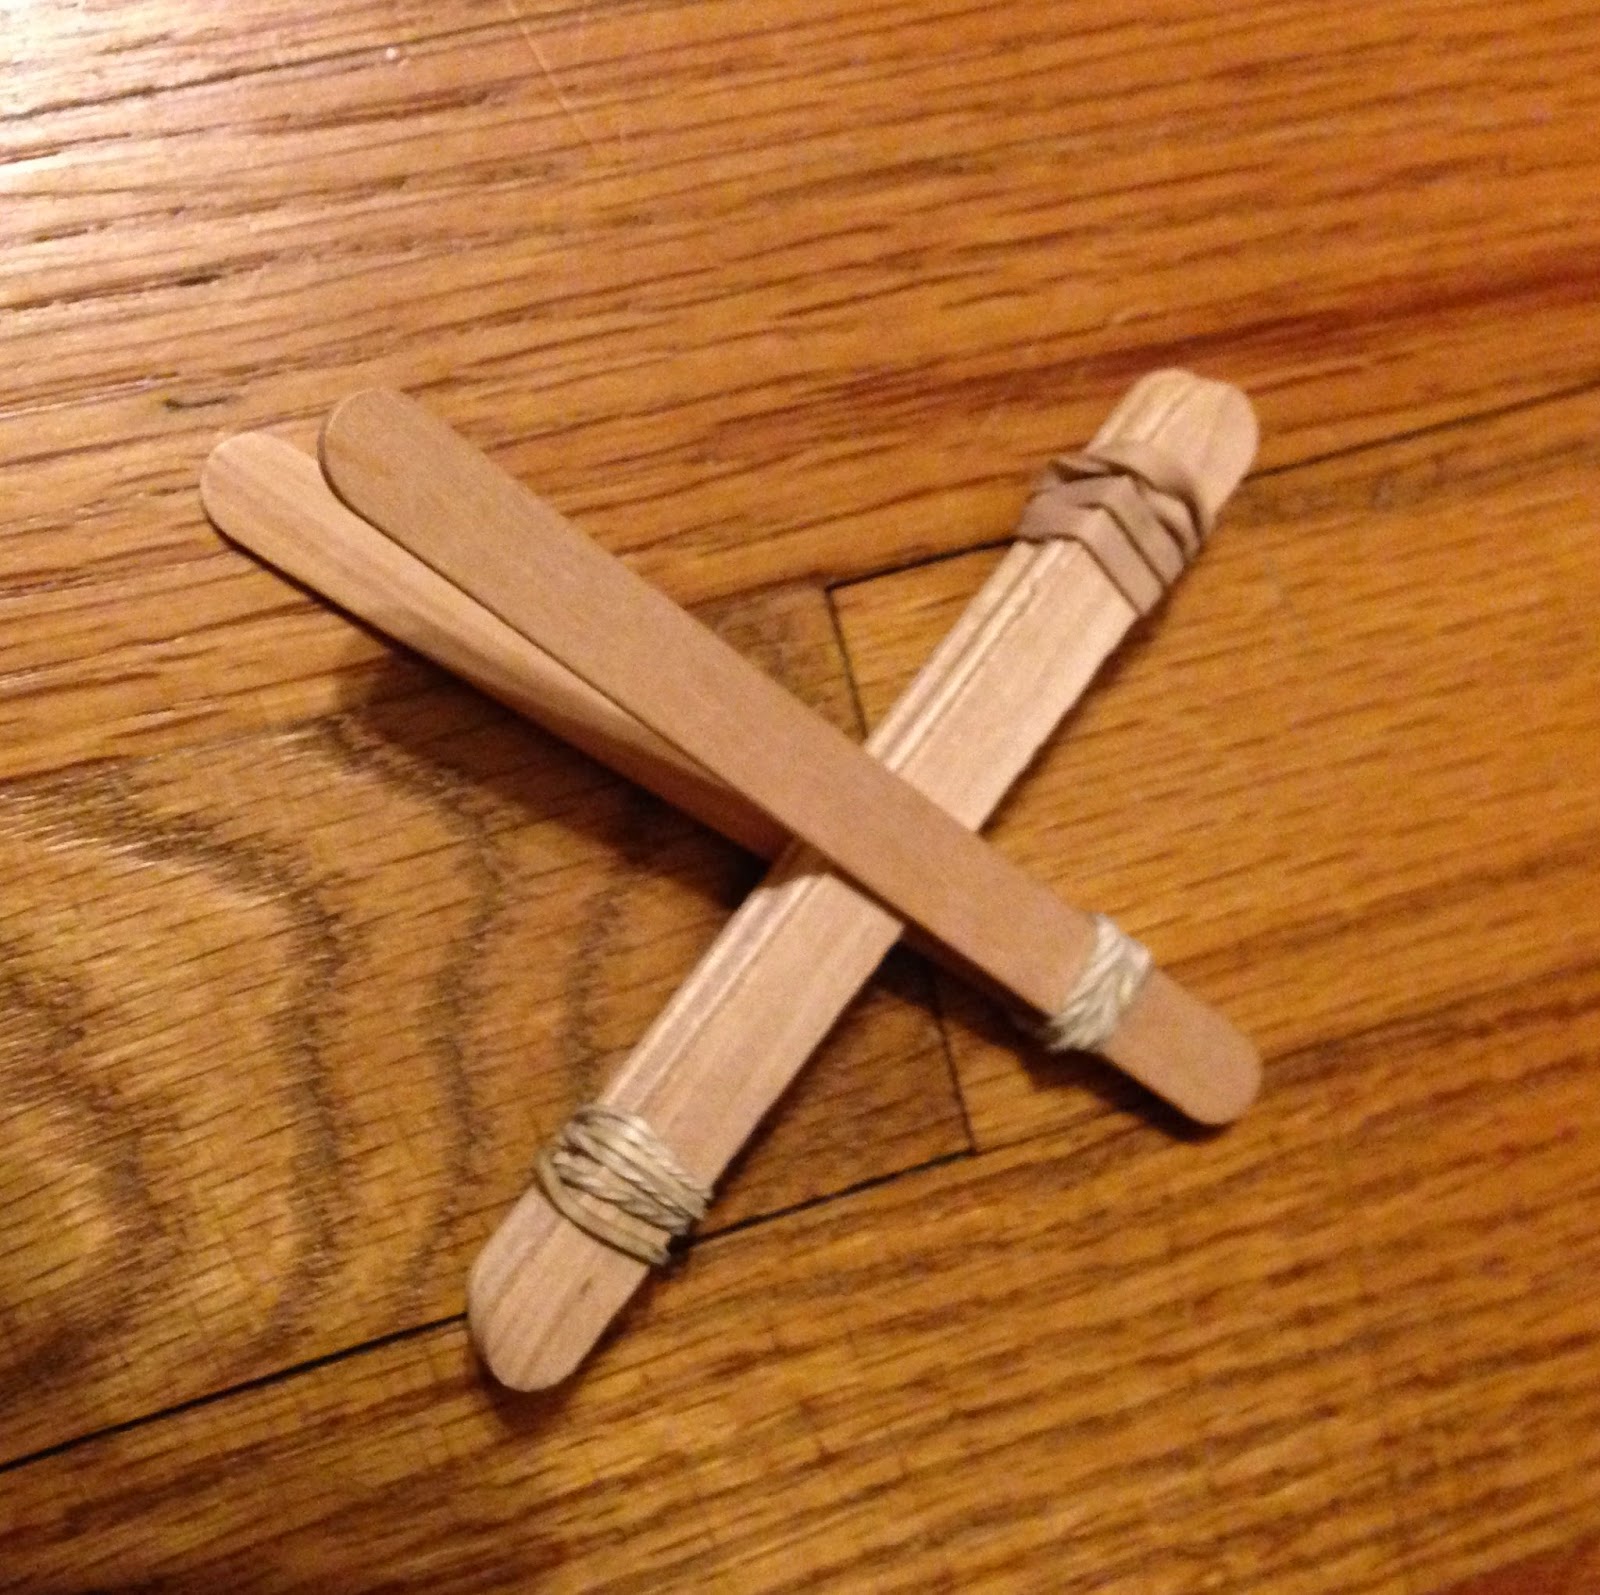 Popsicle stick catapult @ whatilivefor.net